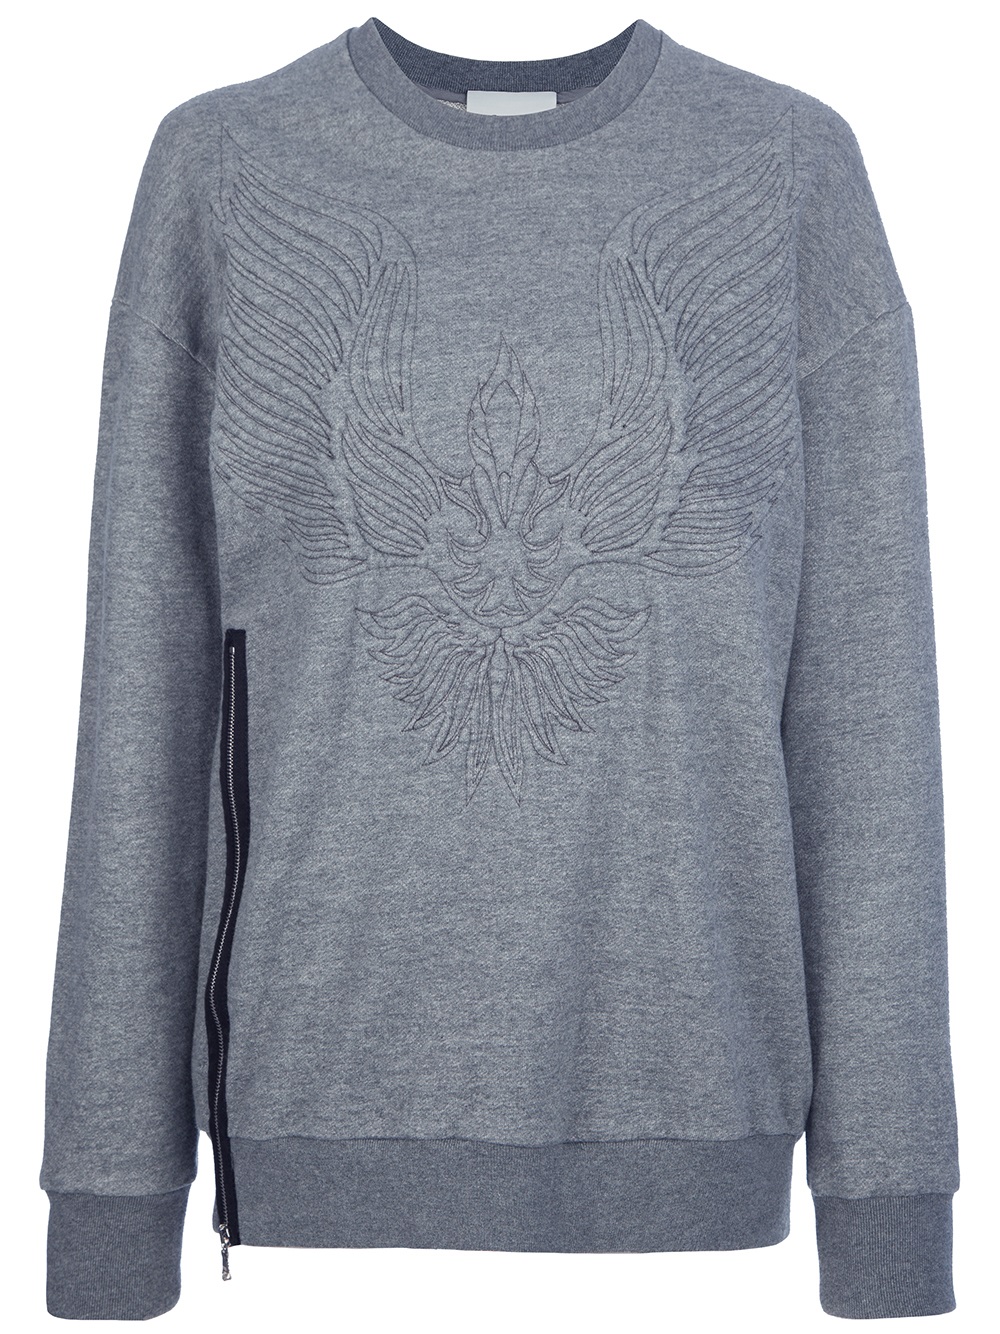 3.1 Phillip Lim Embossed Sweater in Gray (grey) | Lyst